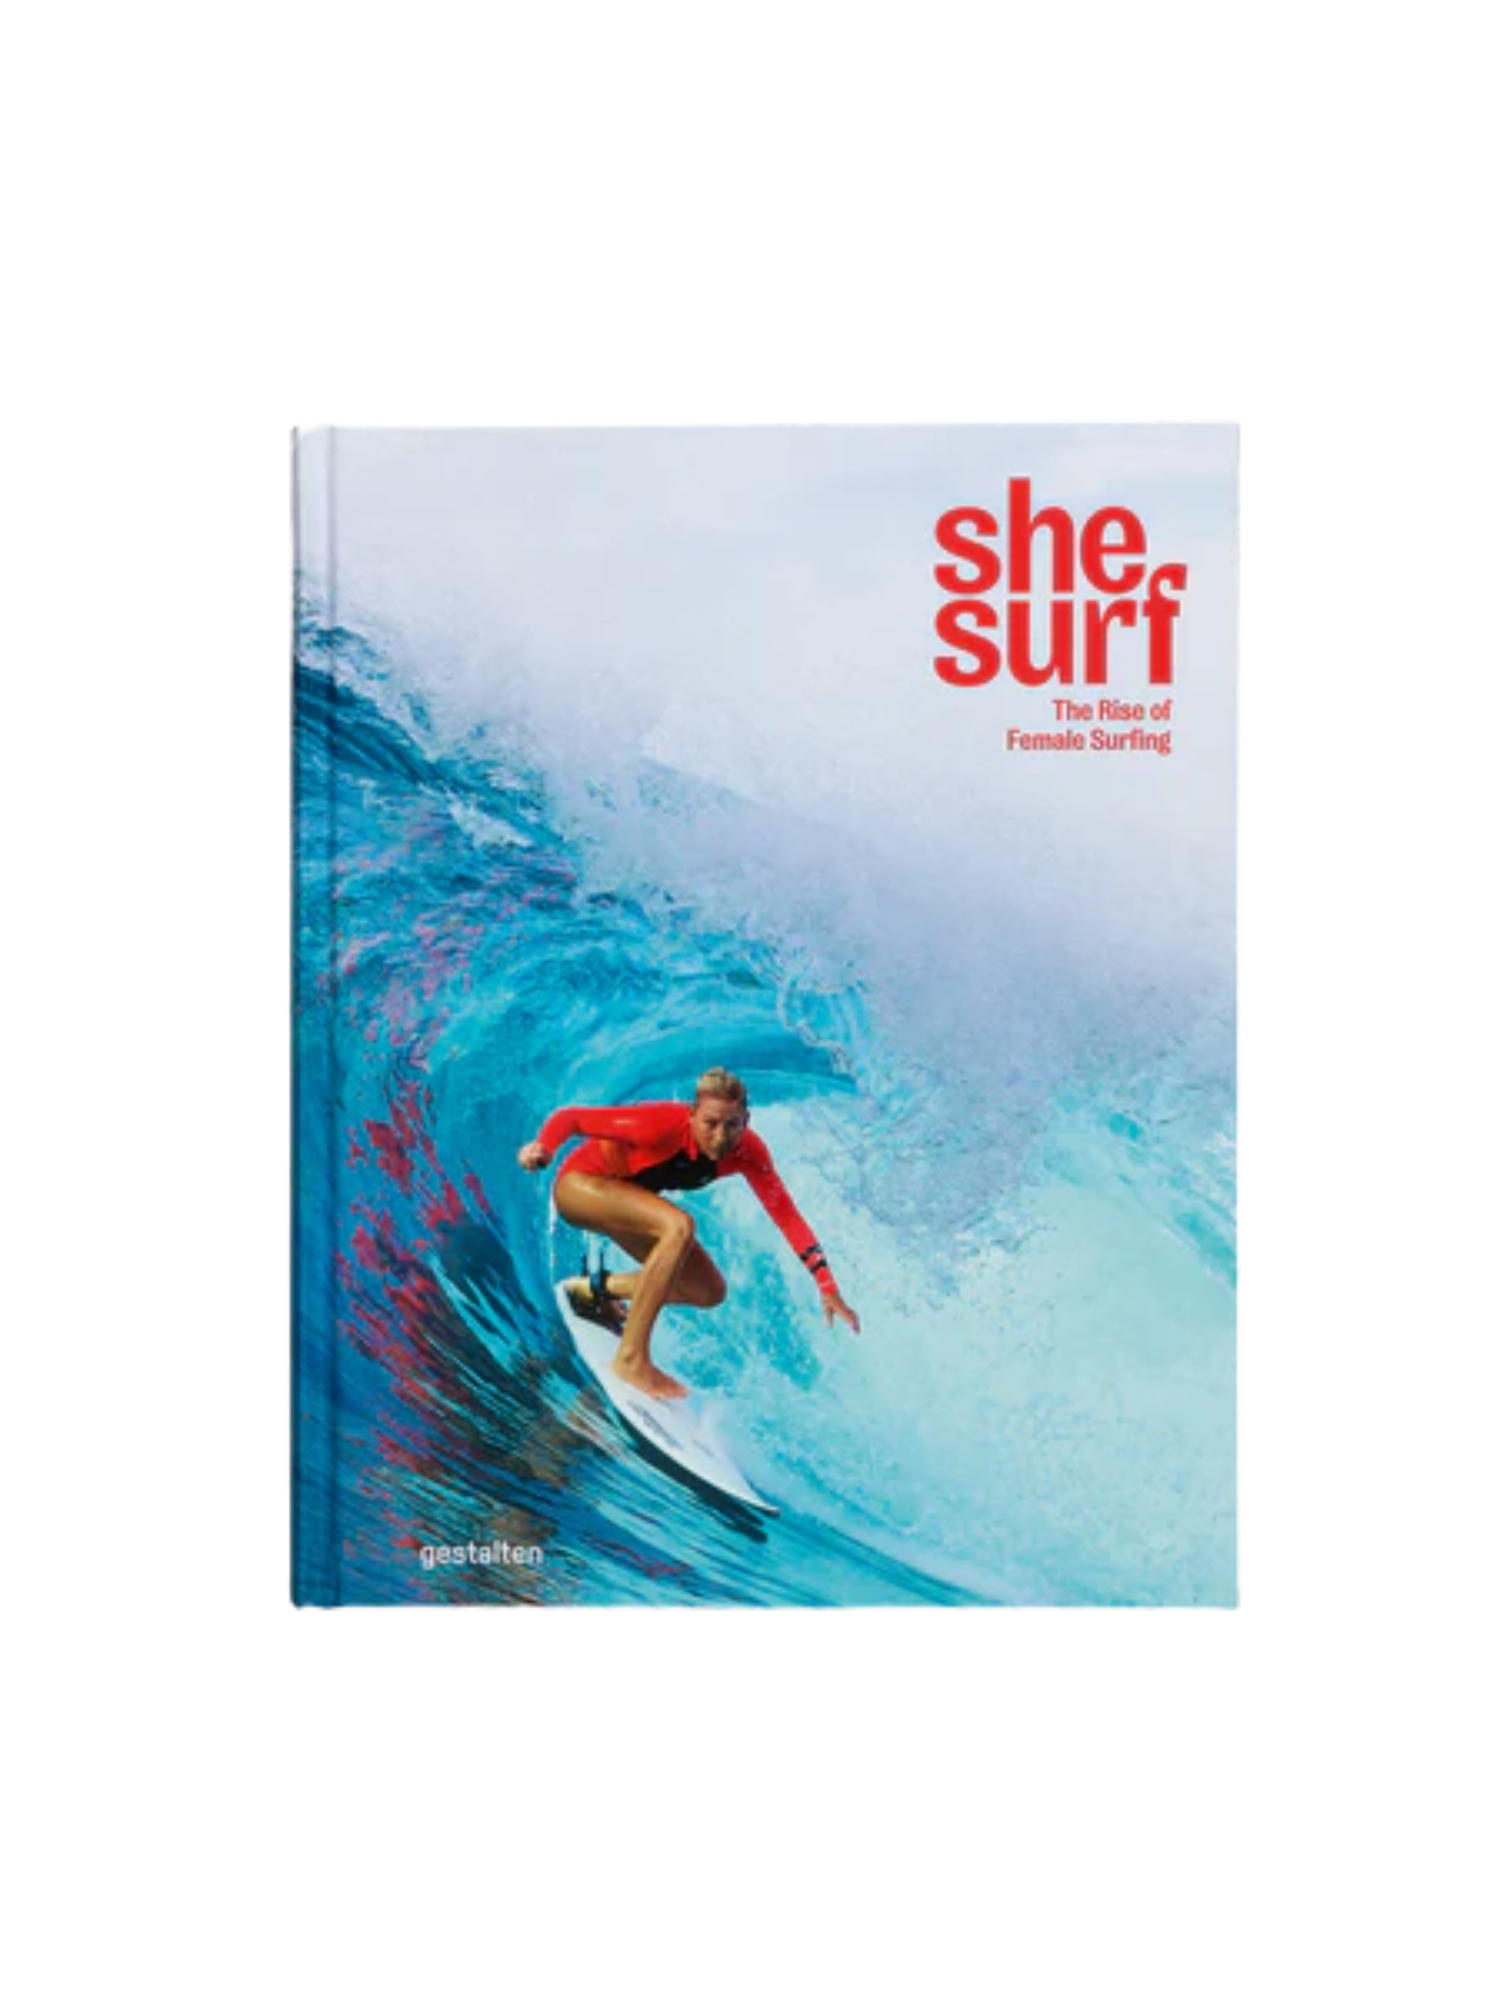 She Surf: the Rise of Female Surfing